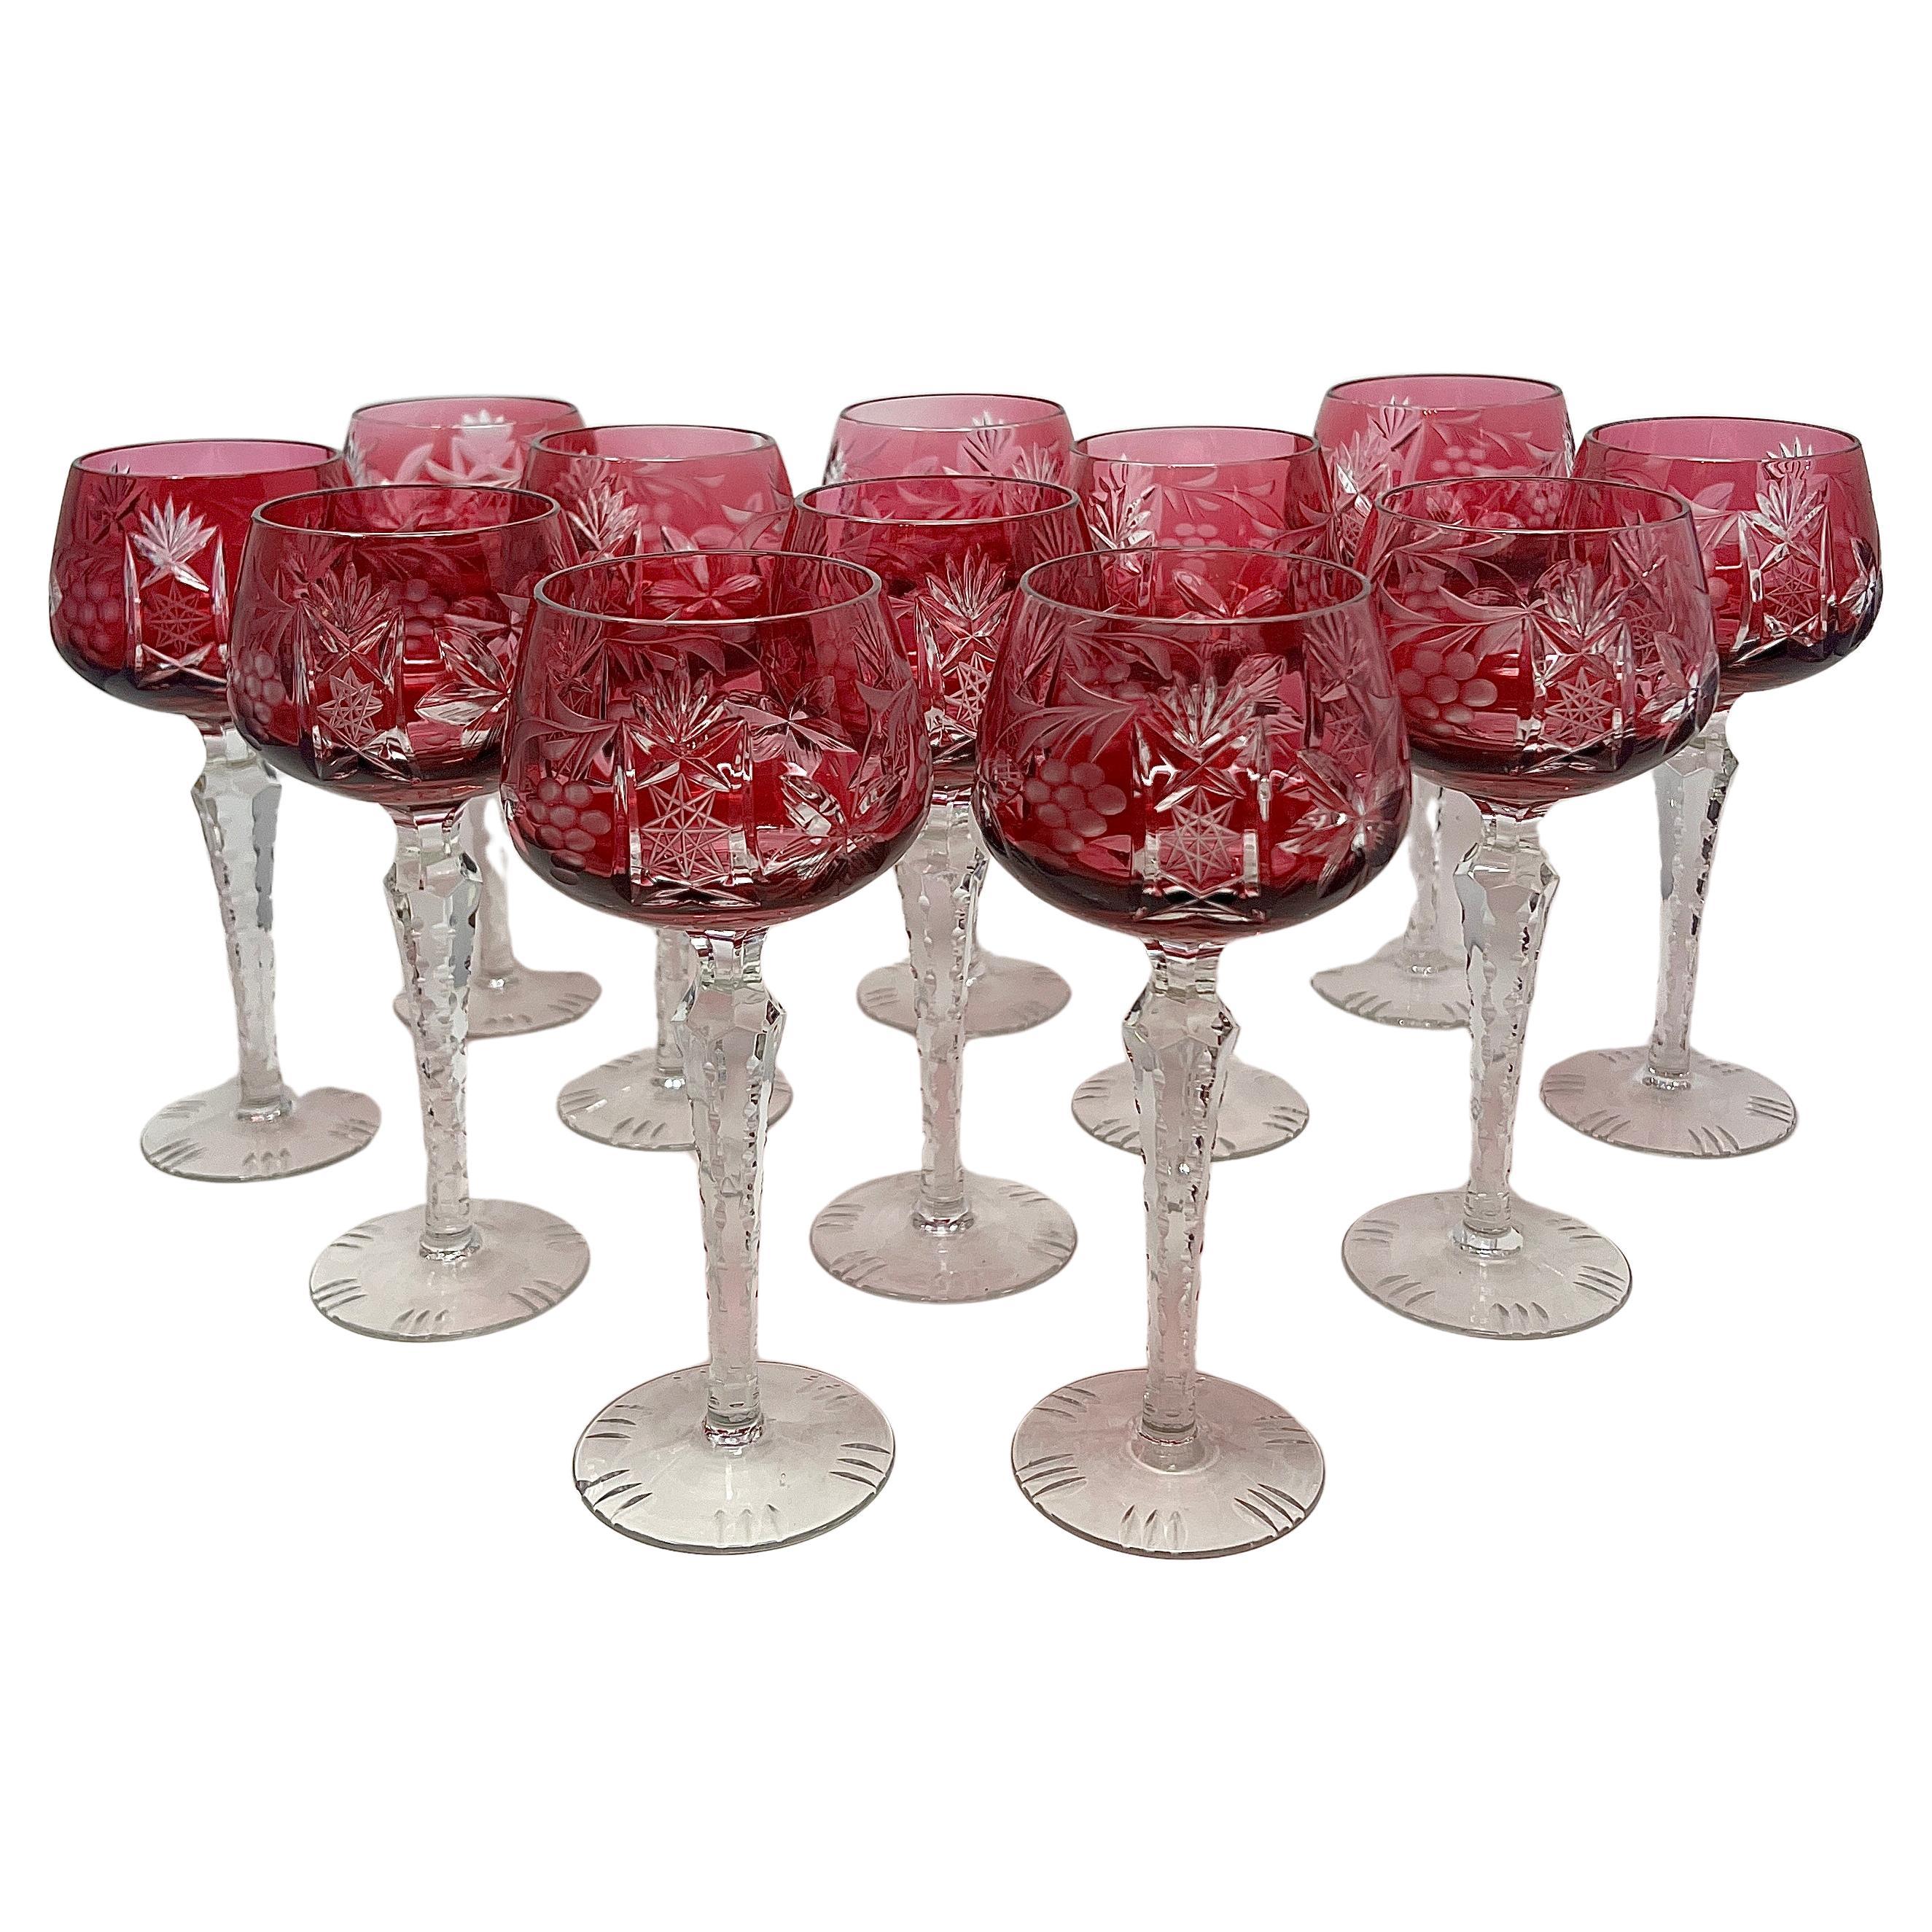 Set of 12 Antique Cranberry Cut-to-Clear Crystal Wine Glasses, Circa 1920's.